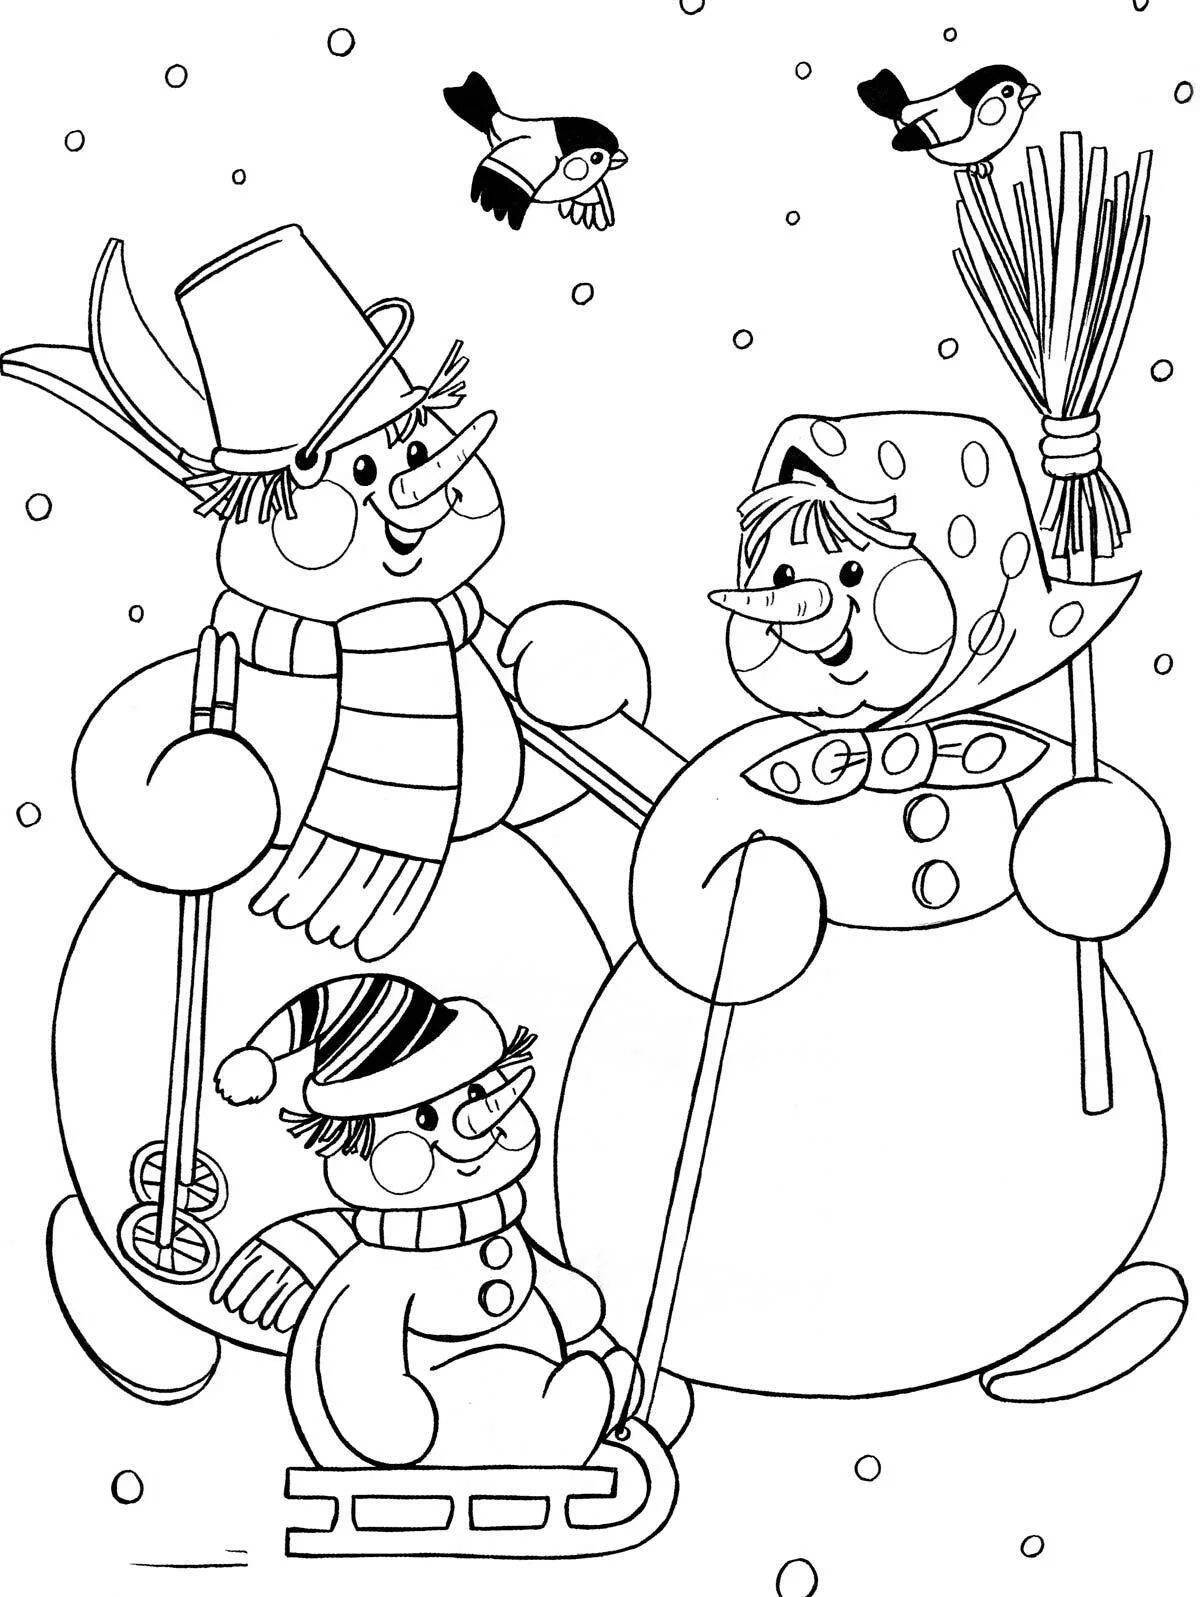 Joyful snowman coloring for children 5 years old